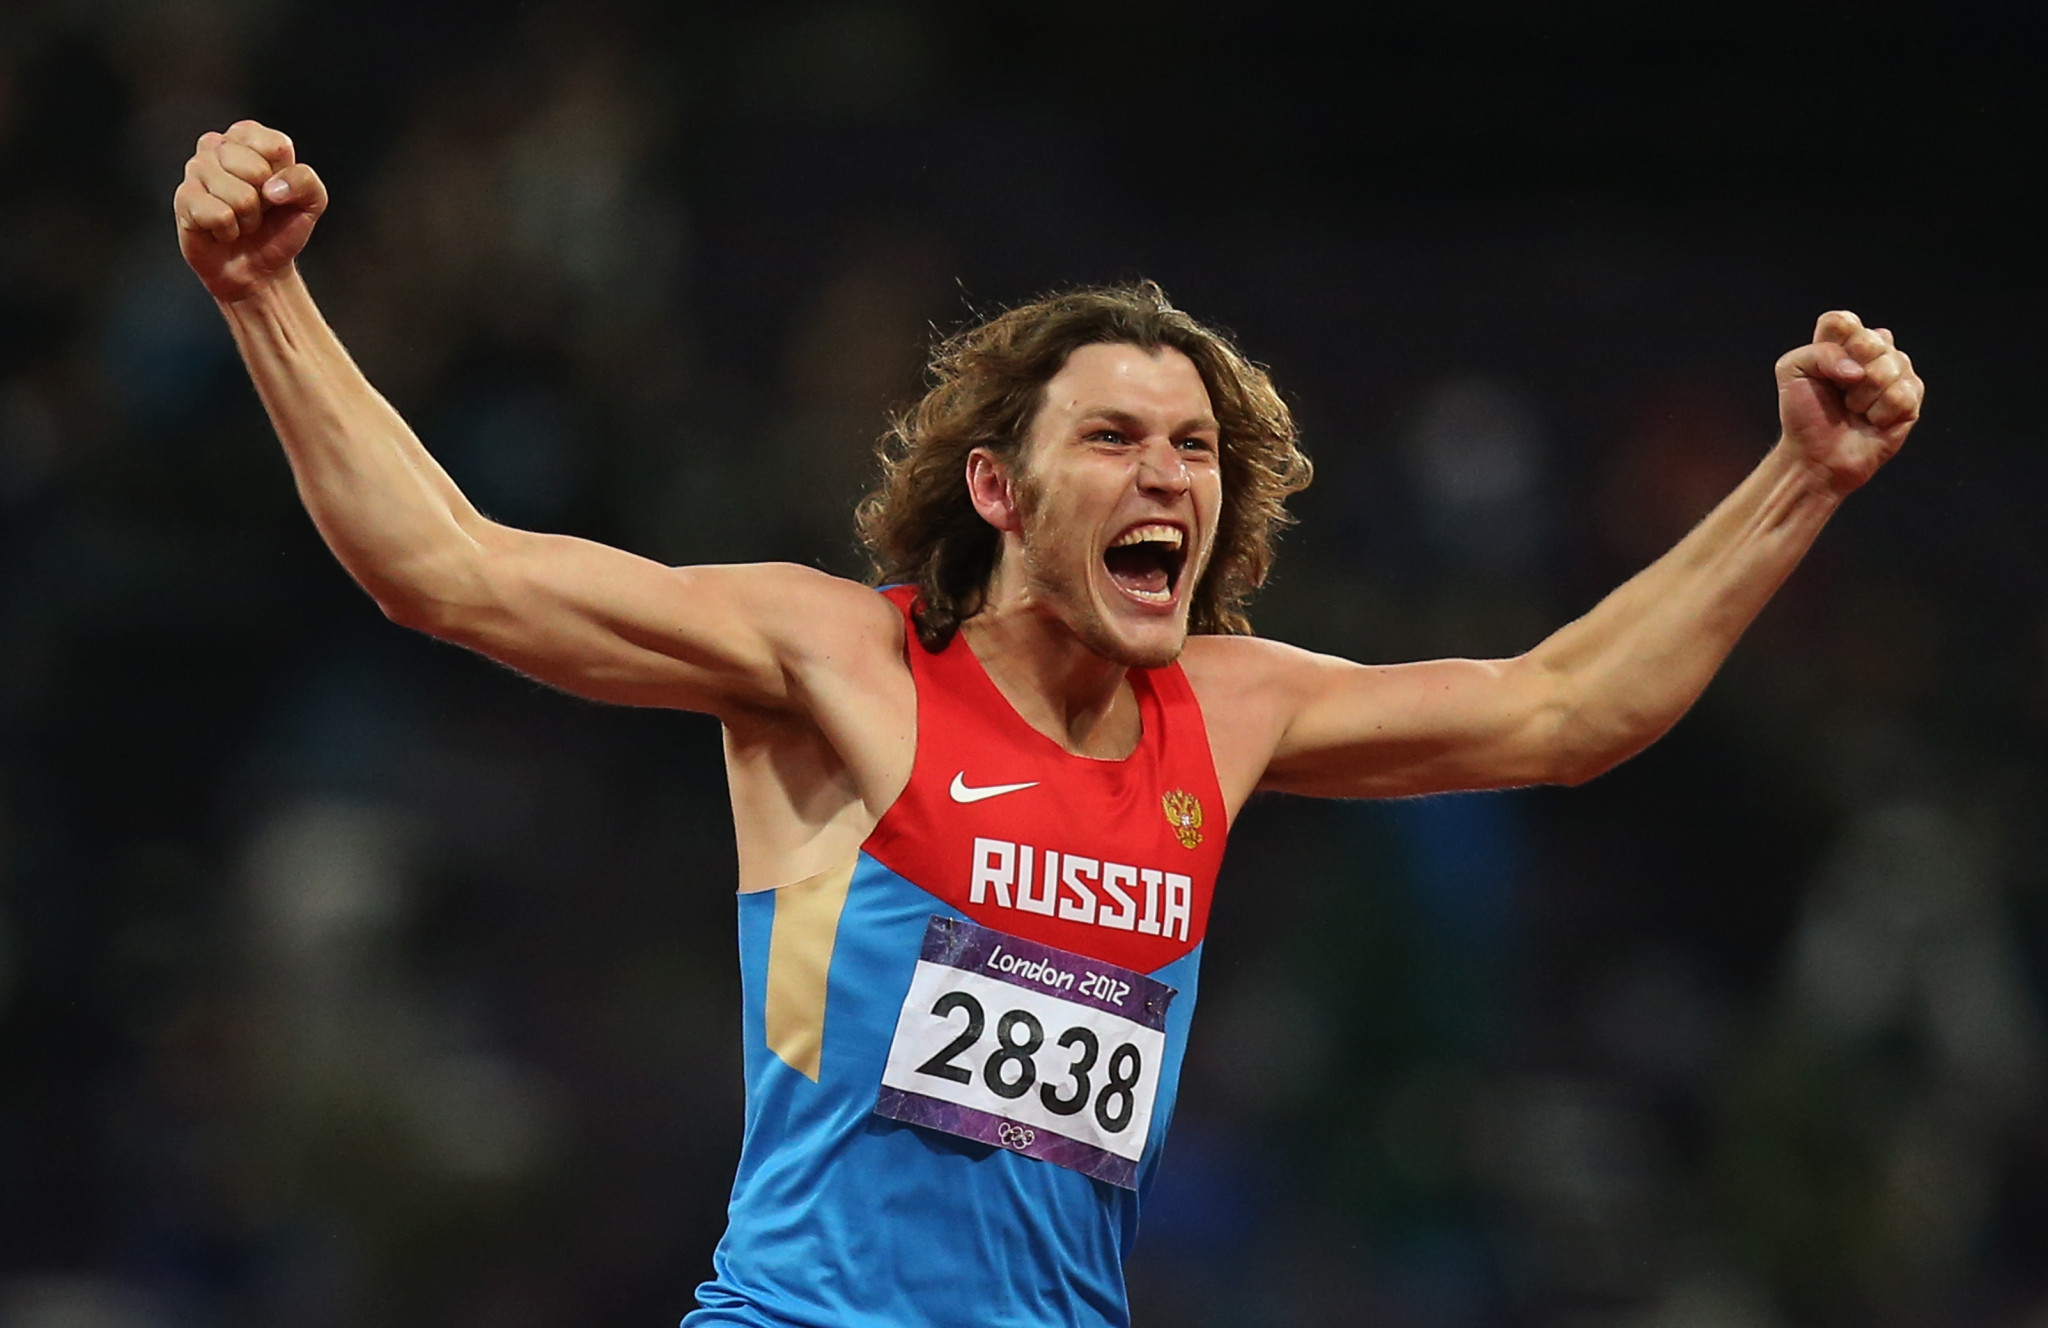 Russia's Ivan Ukhov is to be stripped of his Olympic gold medal he won in the high jump at London 2012 after the Court of Arbitration for Sport found him guilty of doping and banned him for four years ©Getty Images